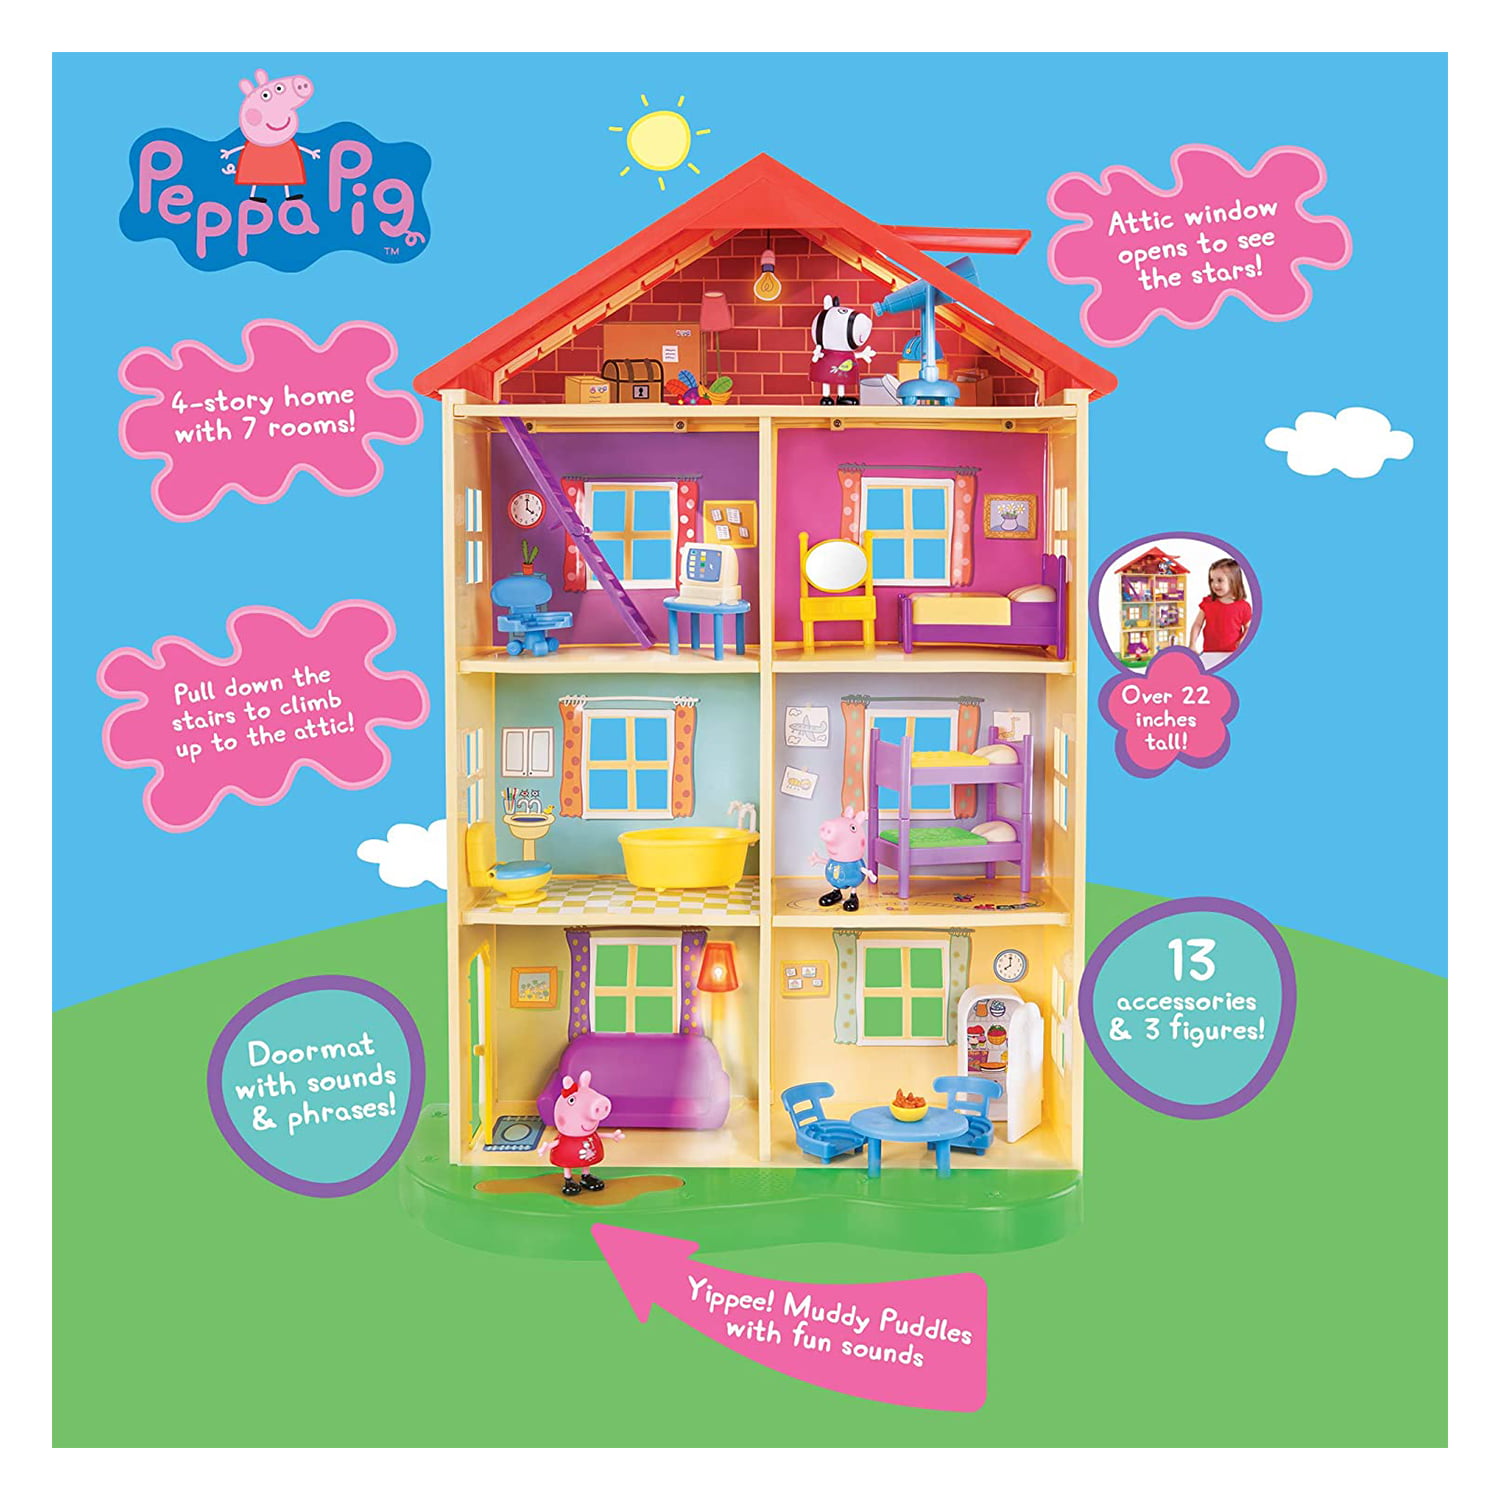 2003 Peppa Pig Large Family House 22.5 Playset w/lights, sounds